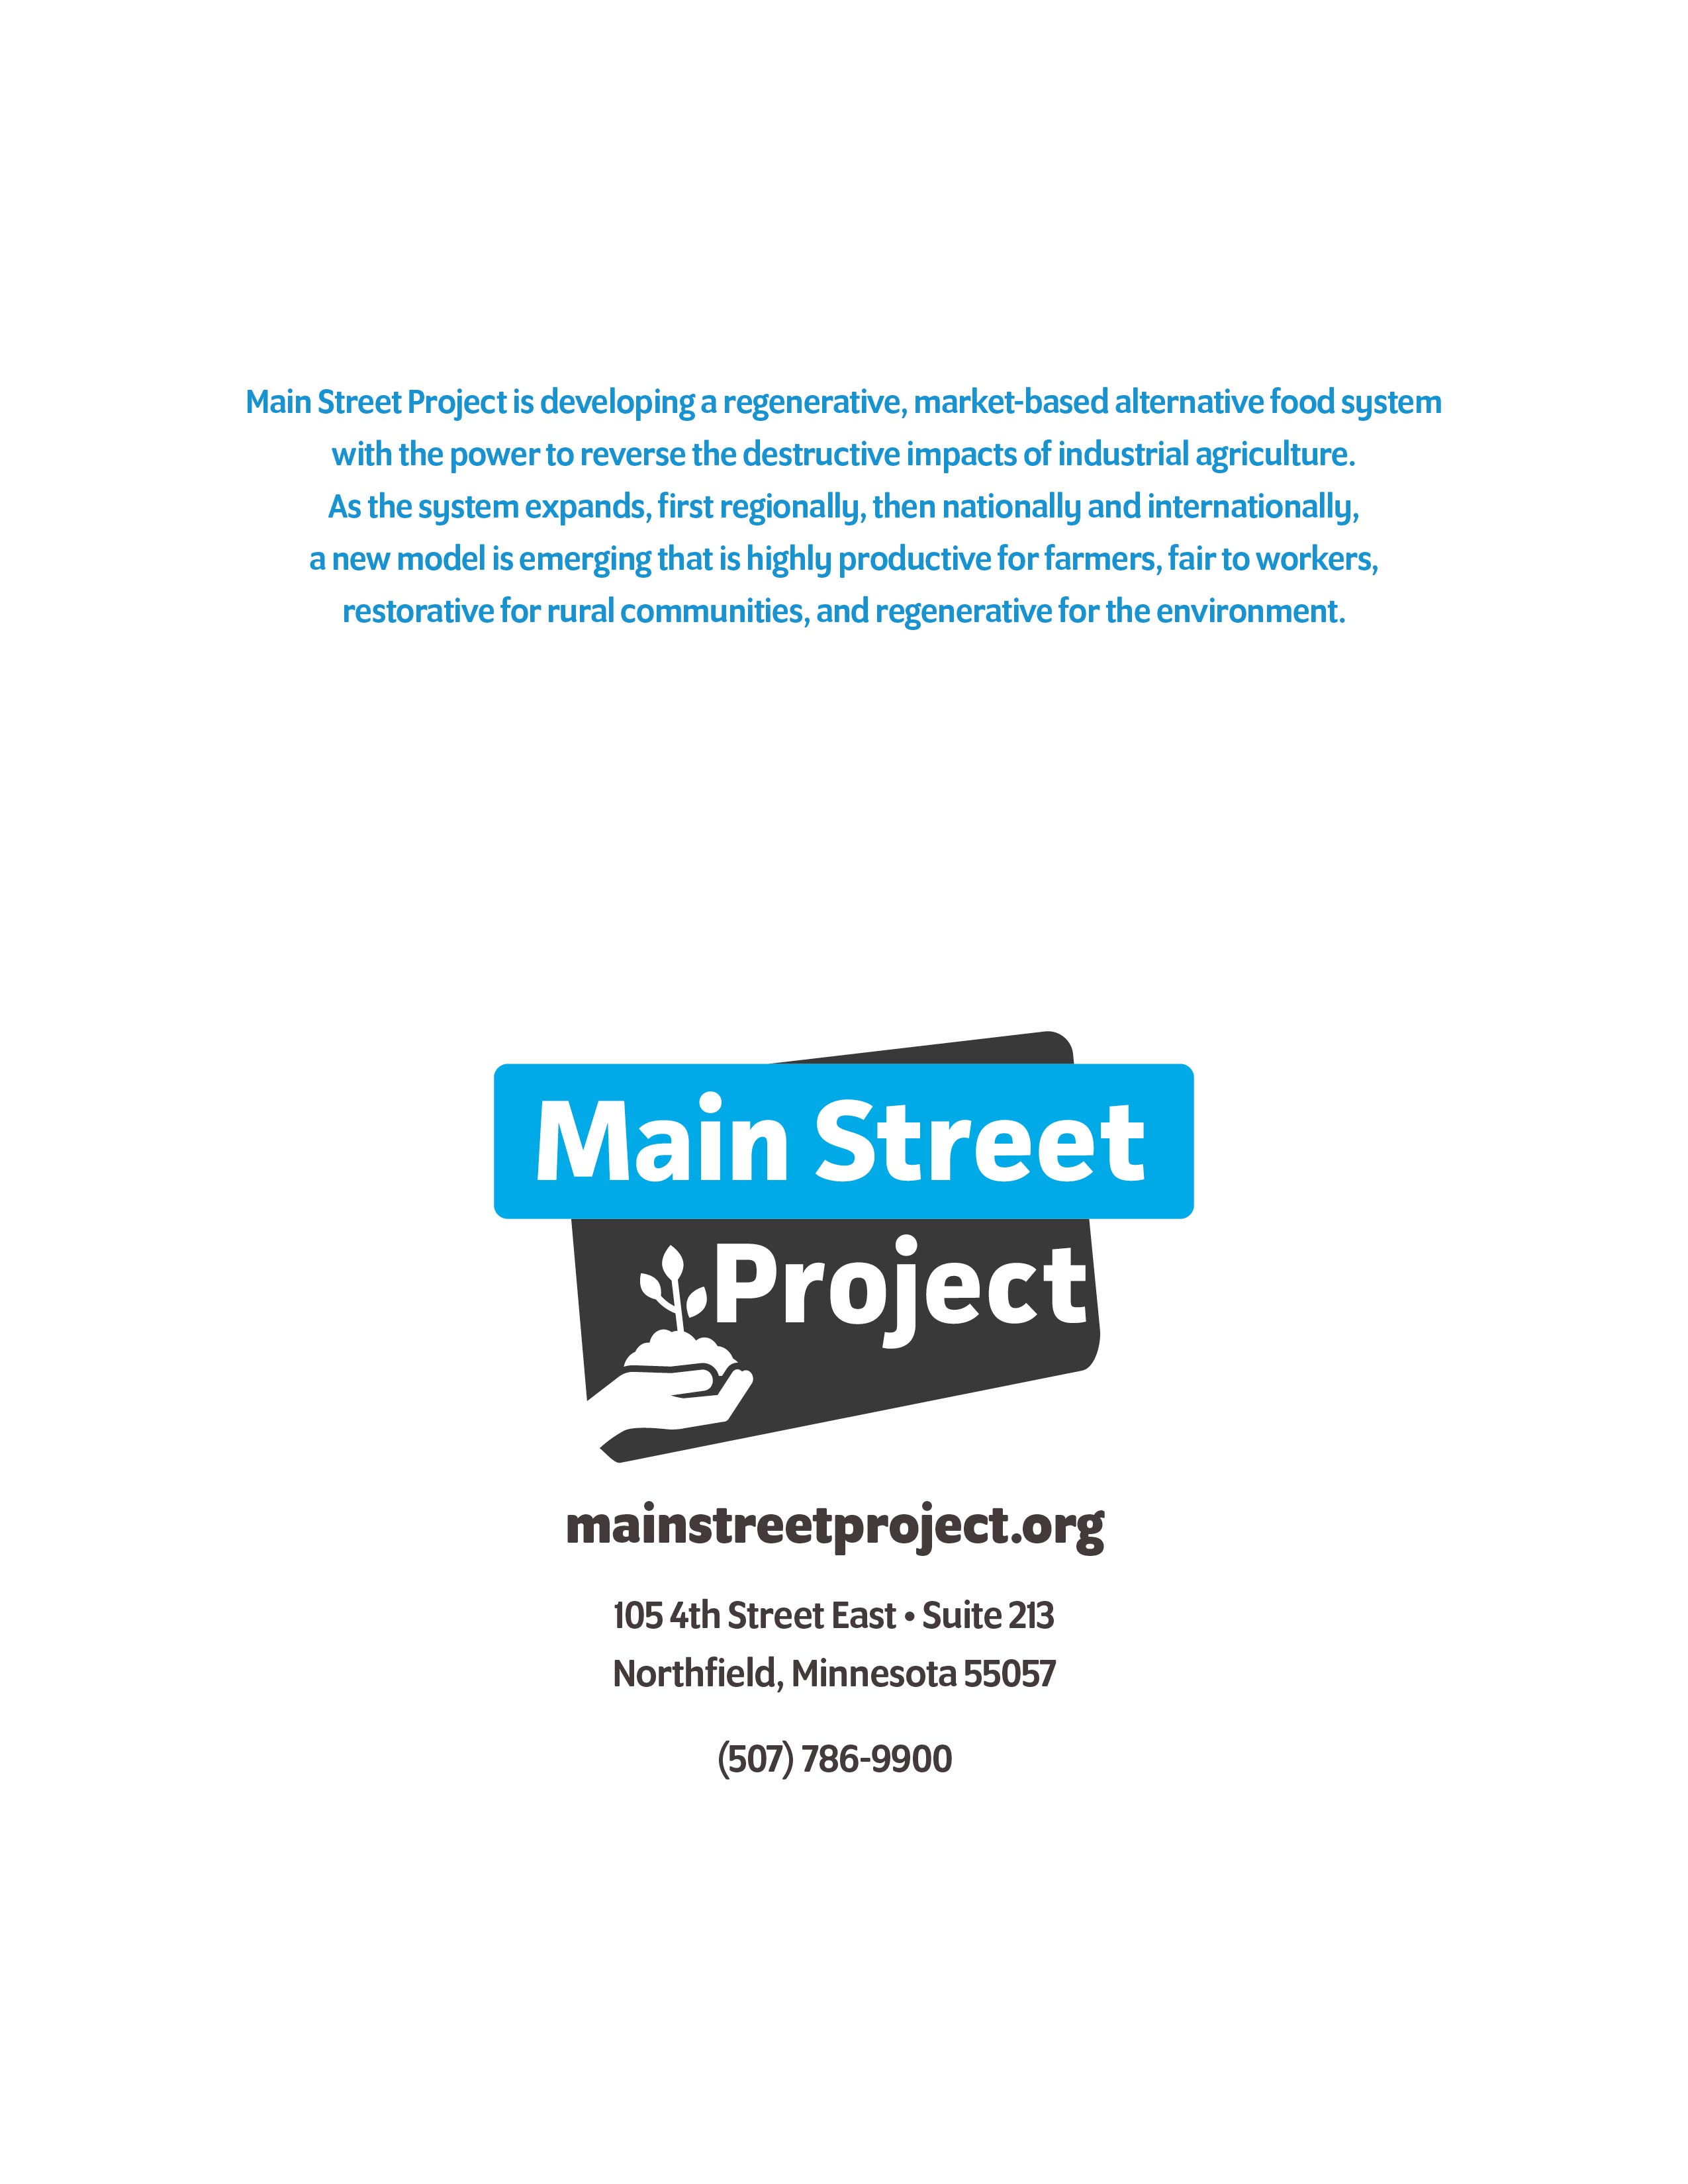 Main Street Project case statement (back cover)